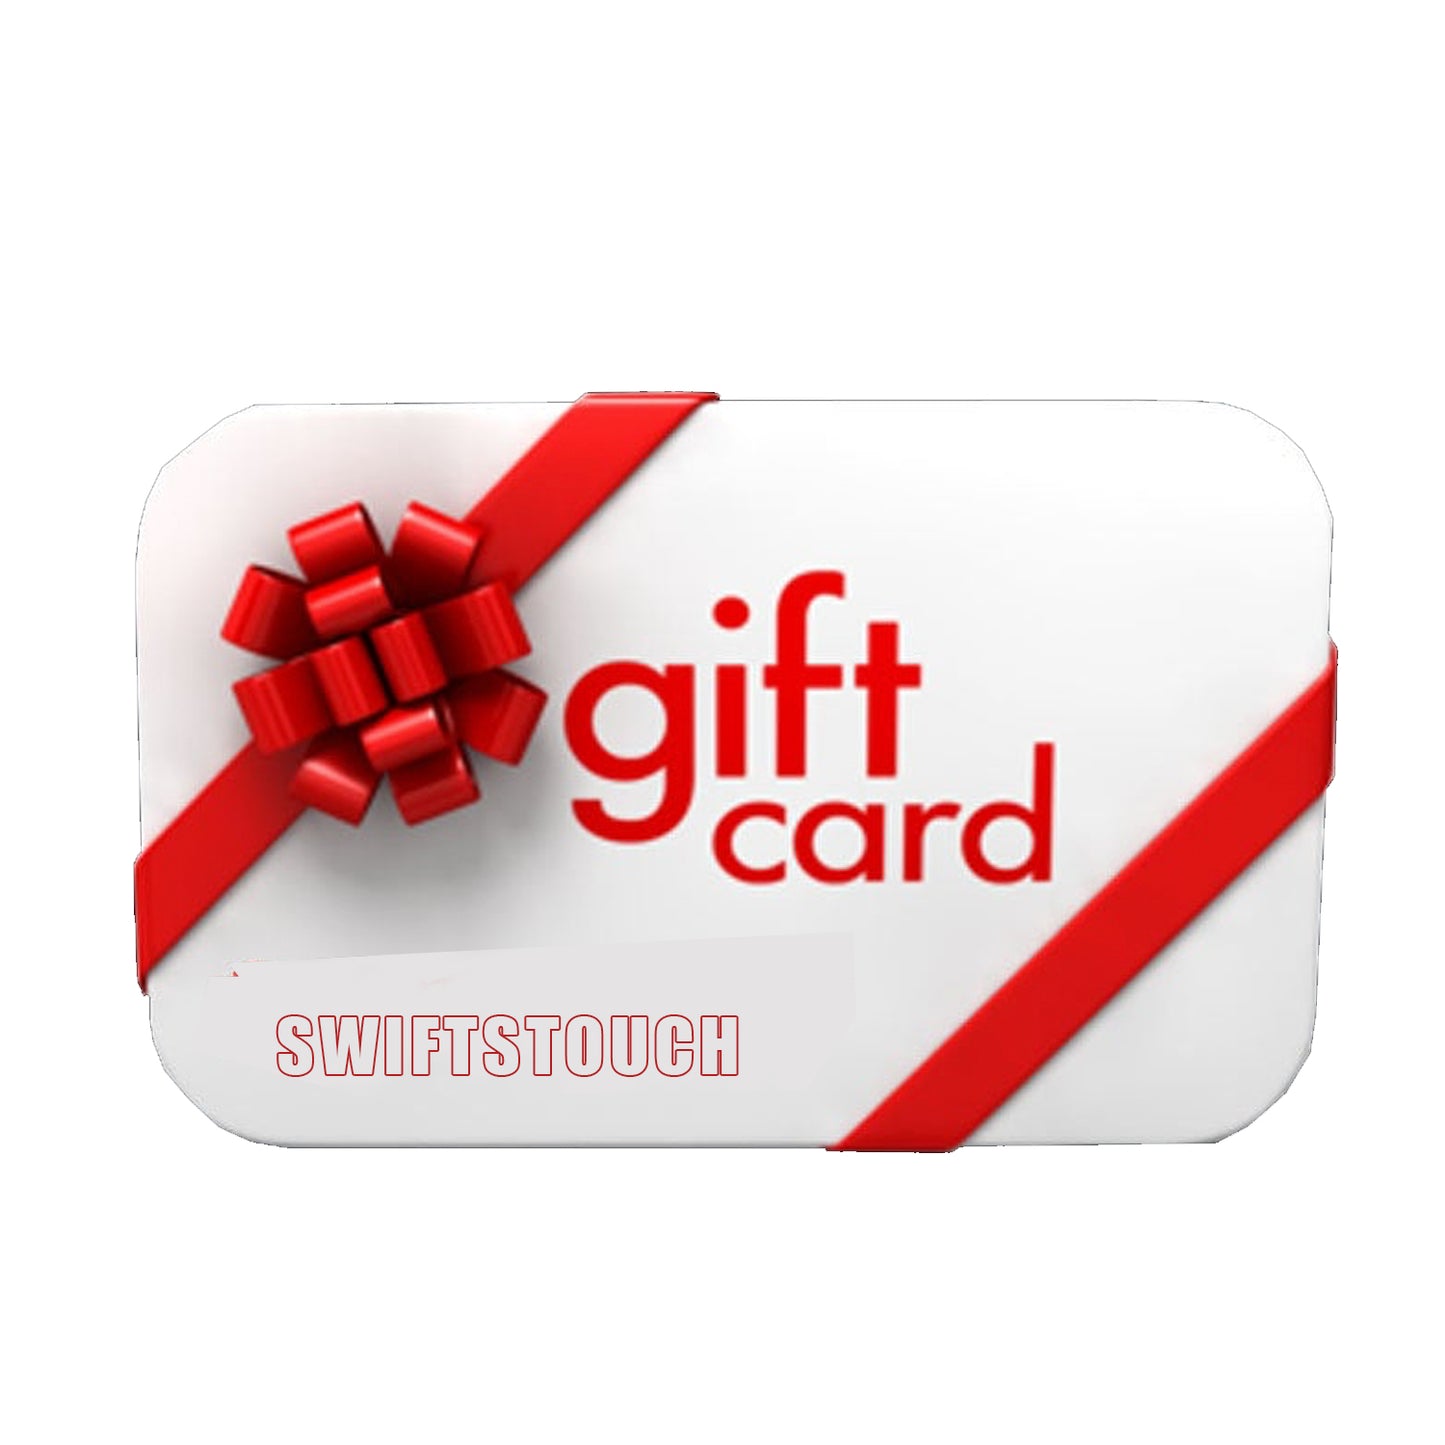 SWIFTS TOUCH GIFT CARD